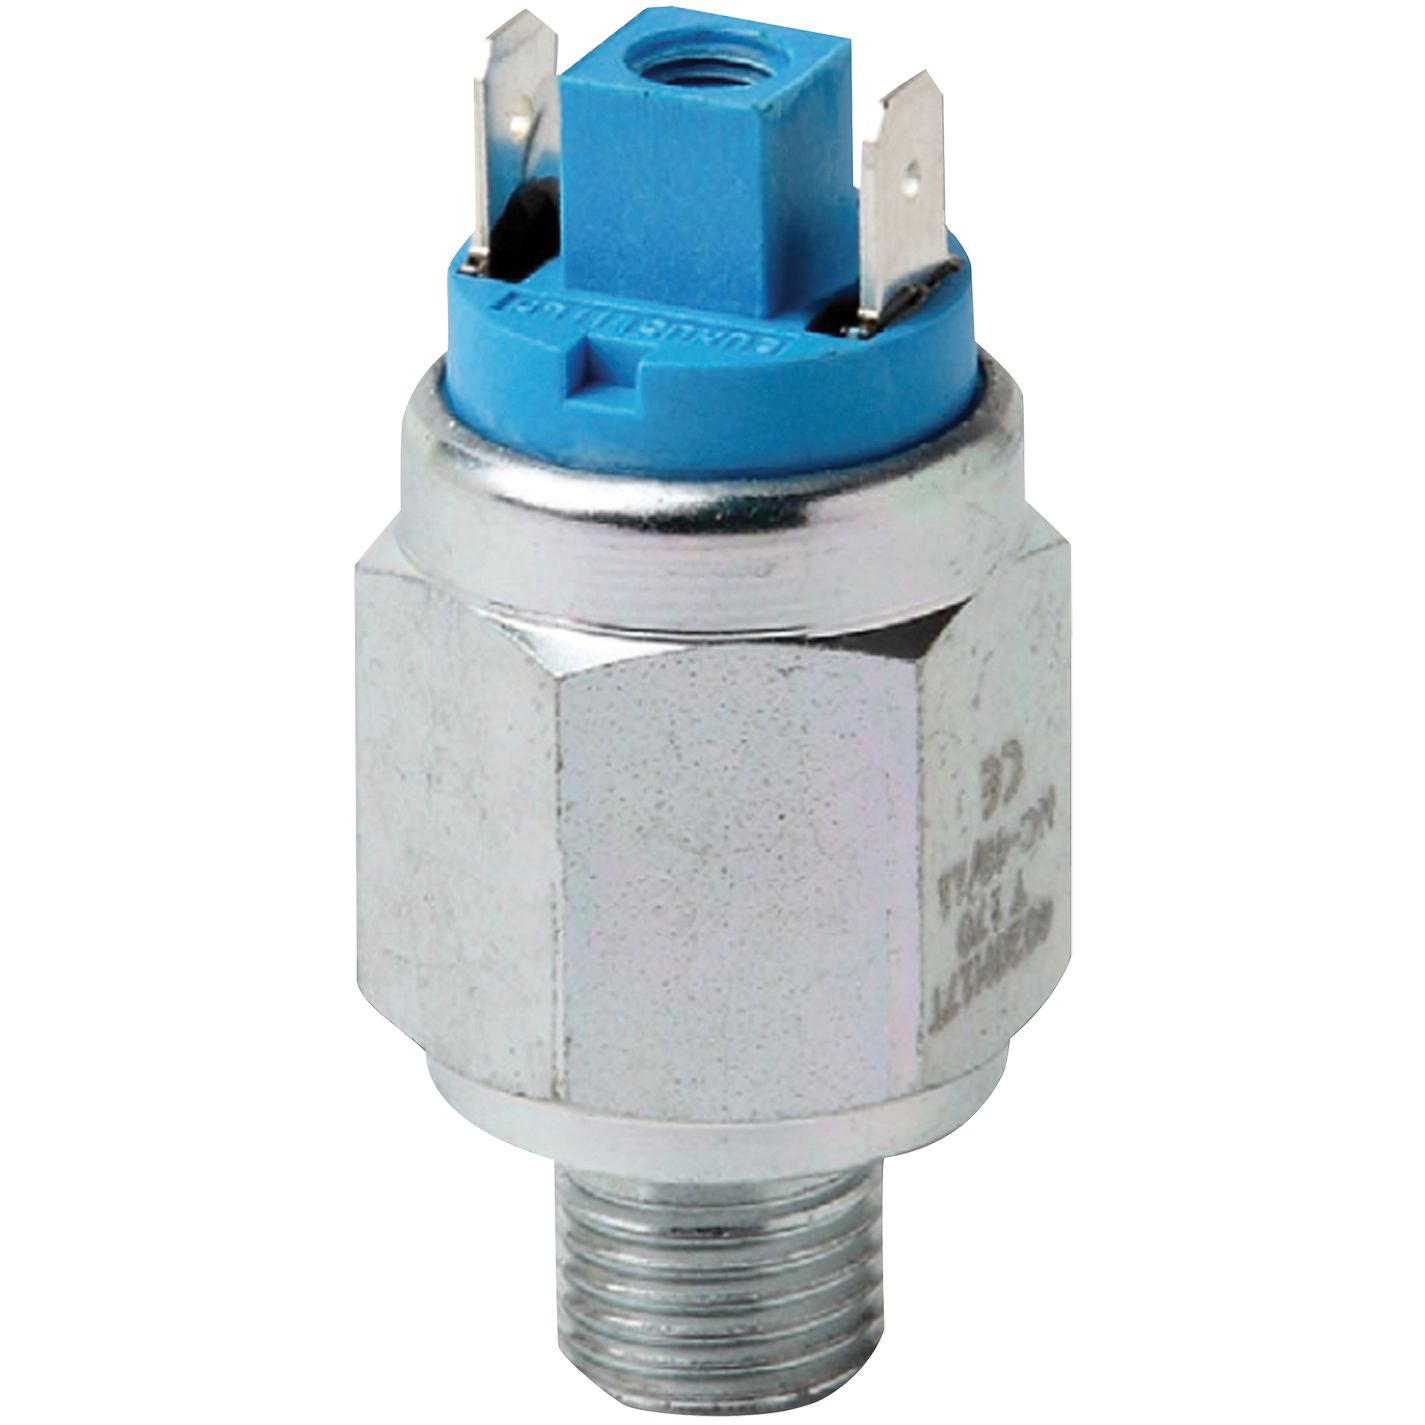 PRESSURE SWITCH SPDT CONTACT 0.3-1.5